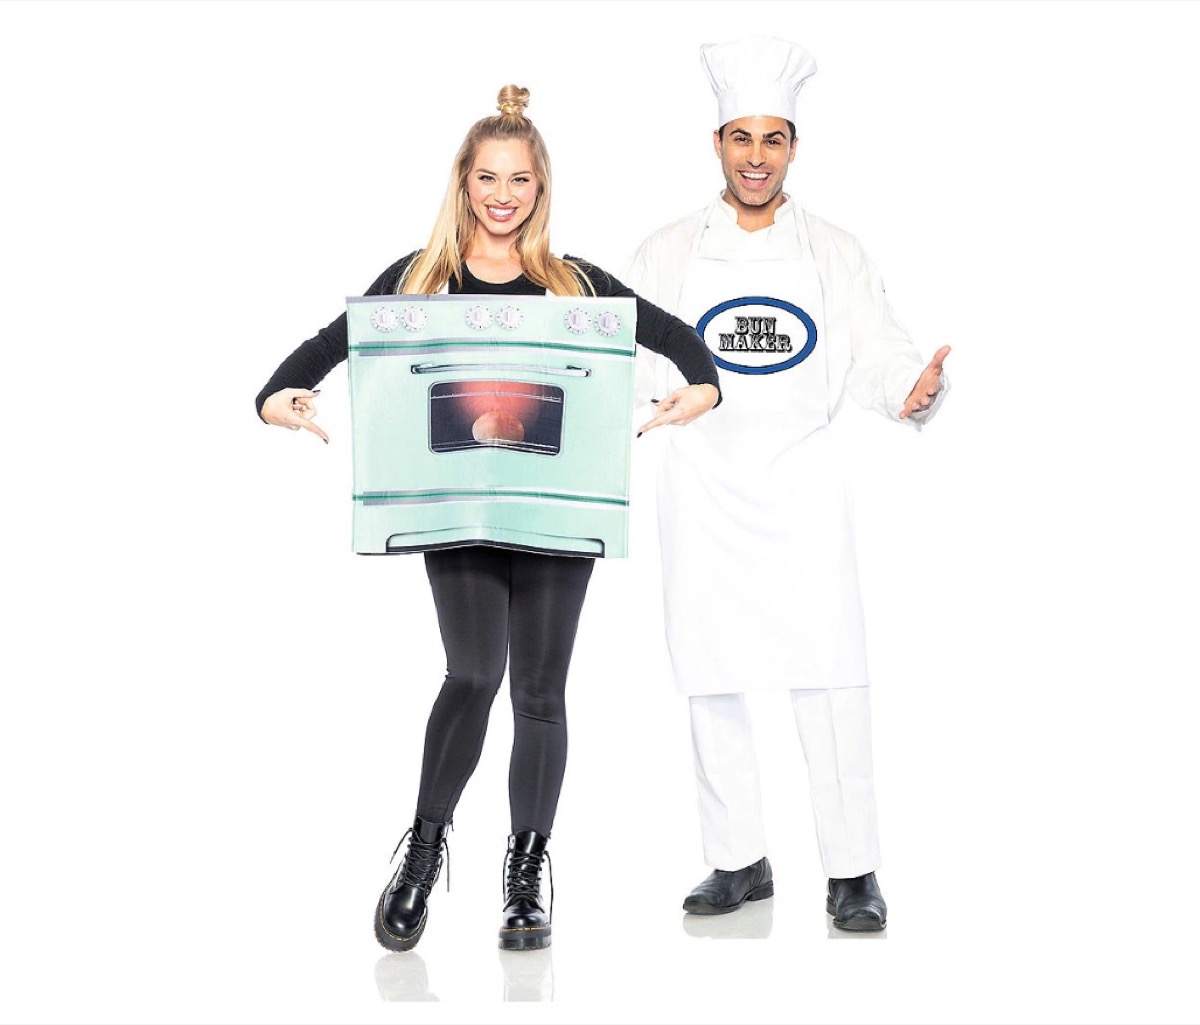 chef and oven costume, best halloween costumes